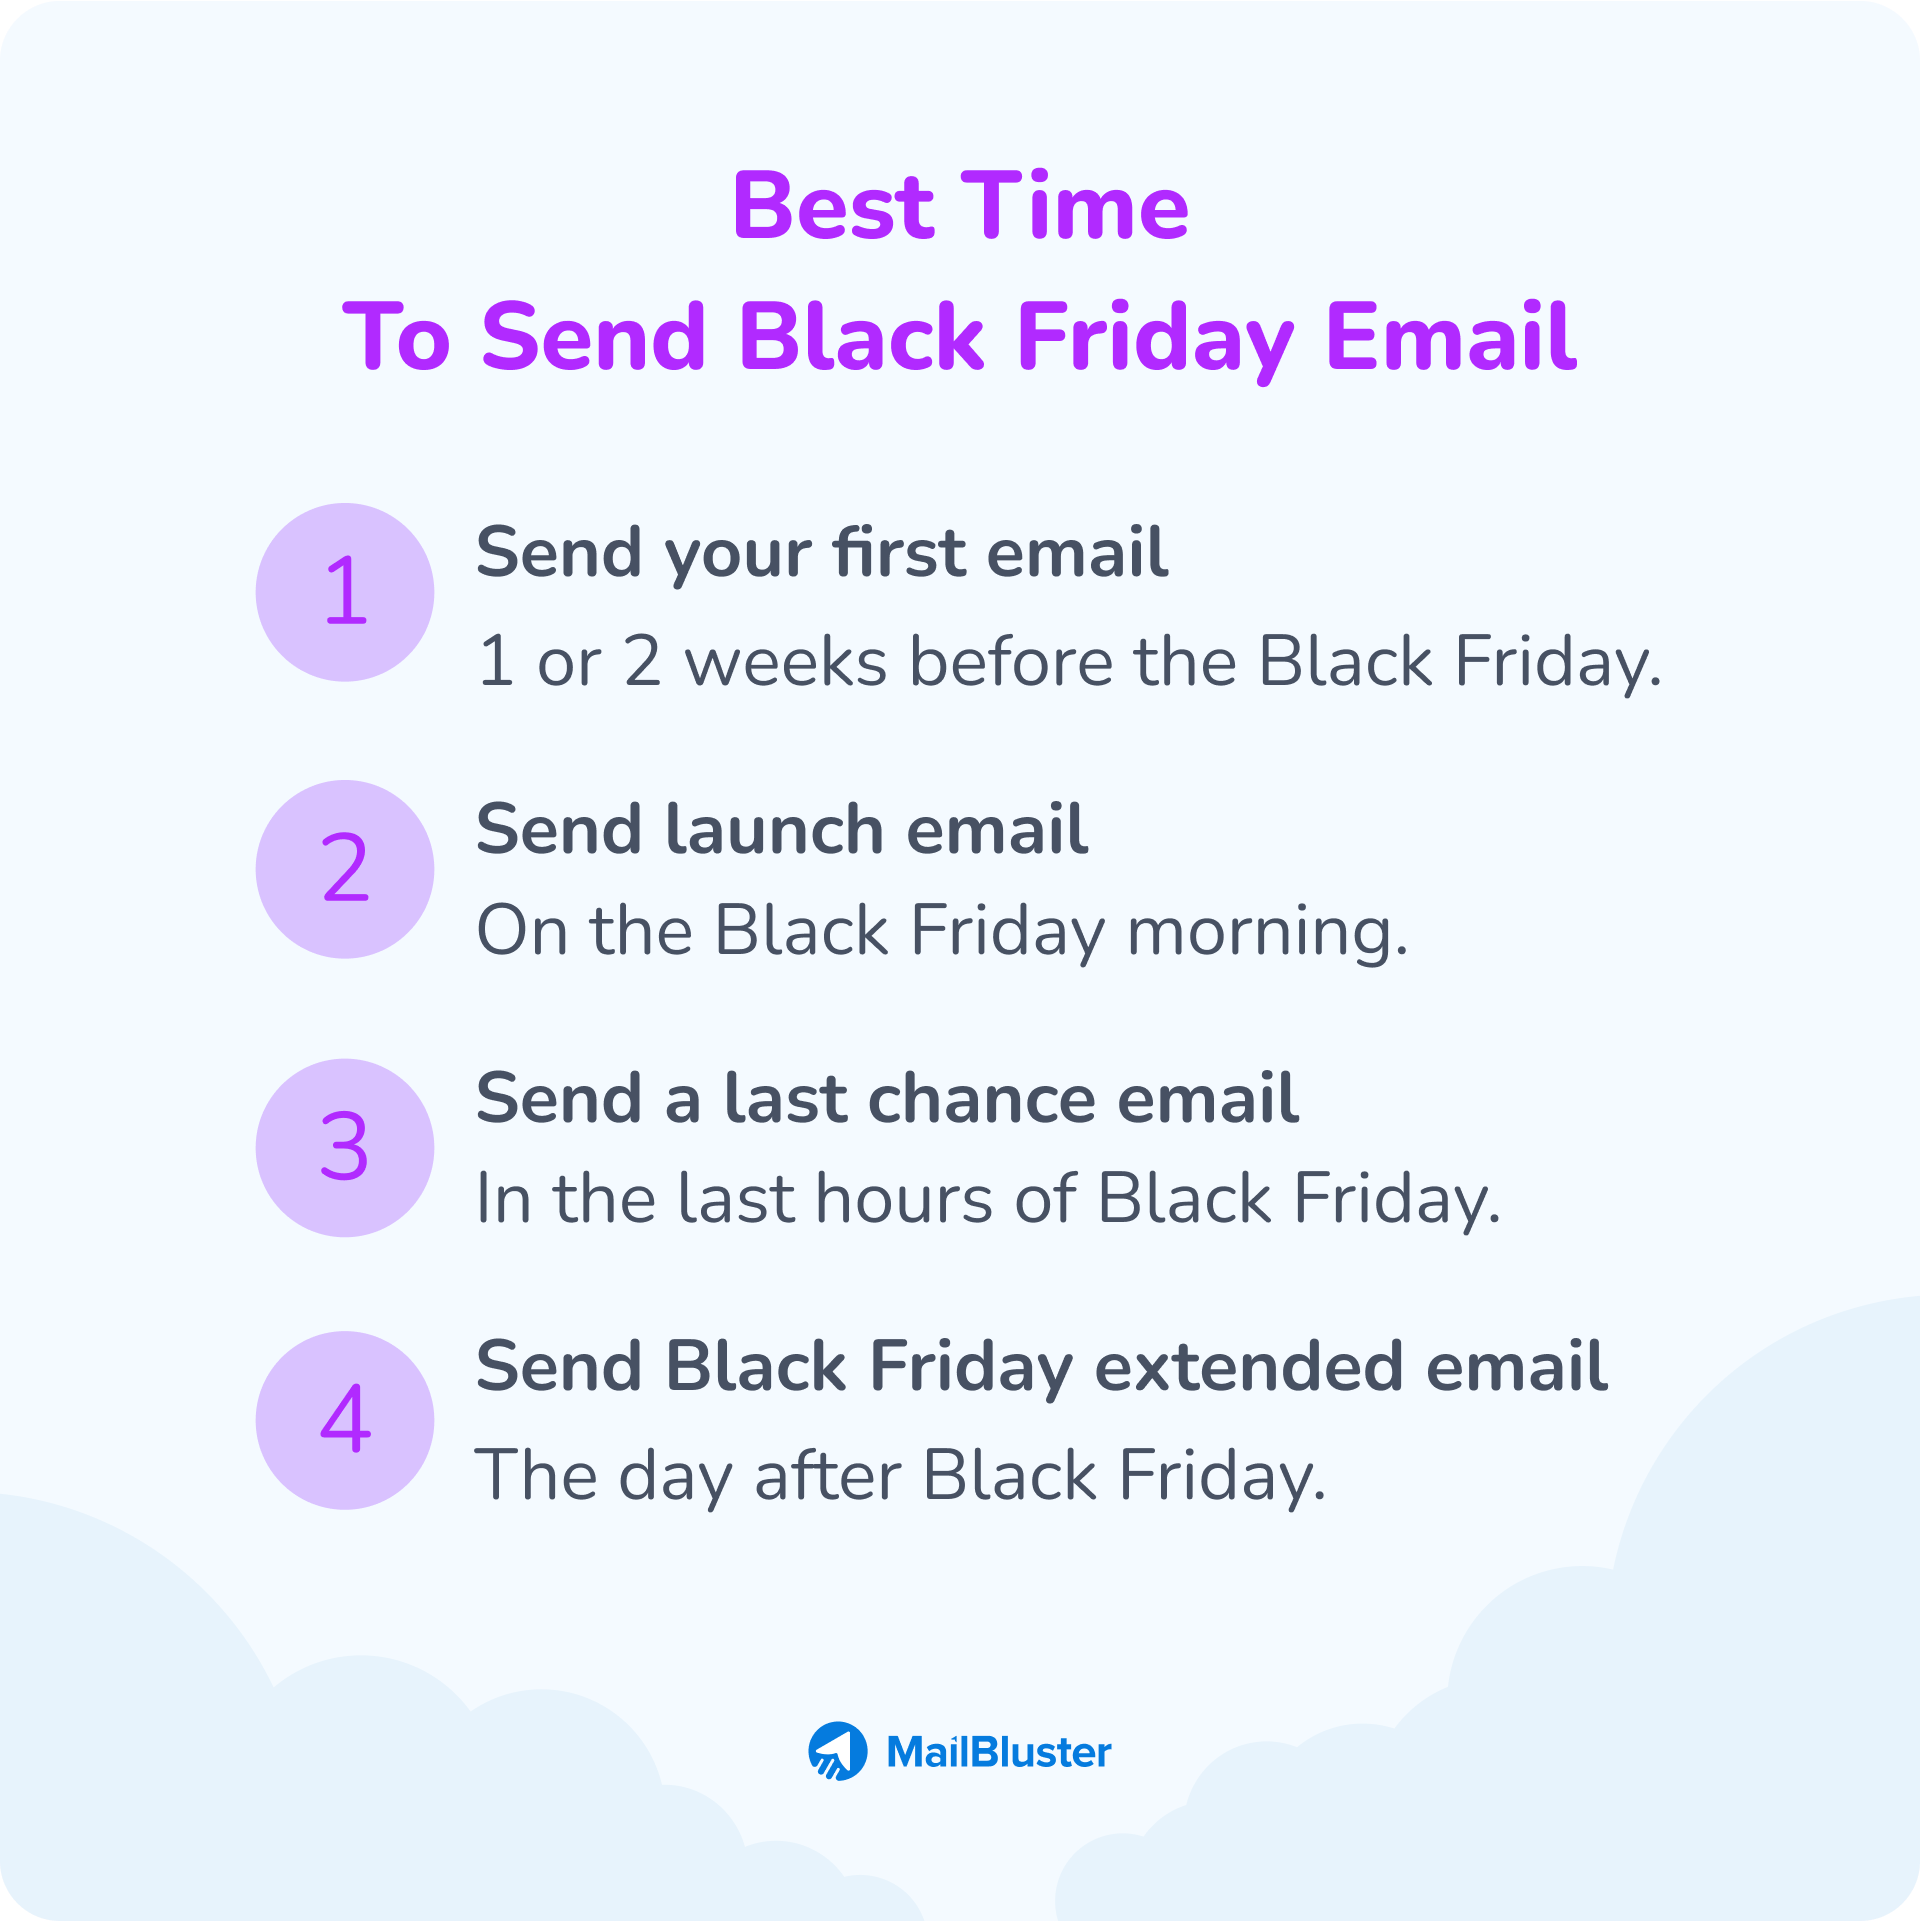 Best time to send Black Friday email.